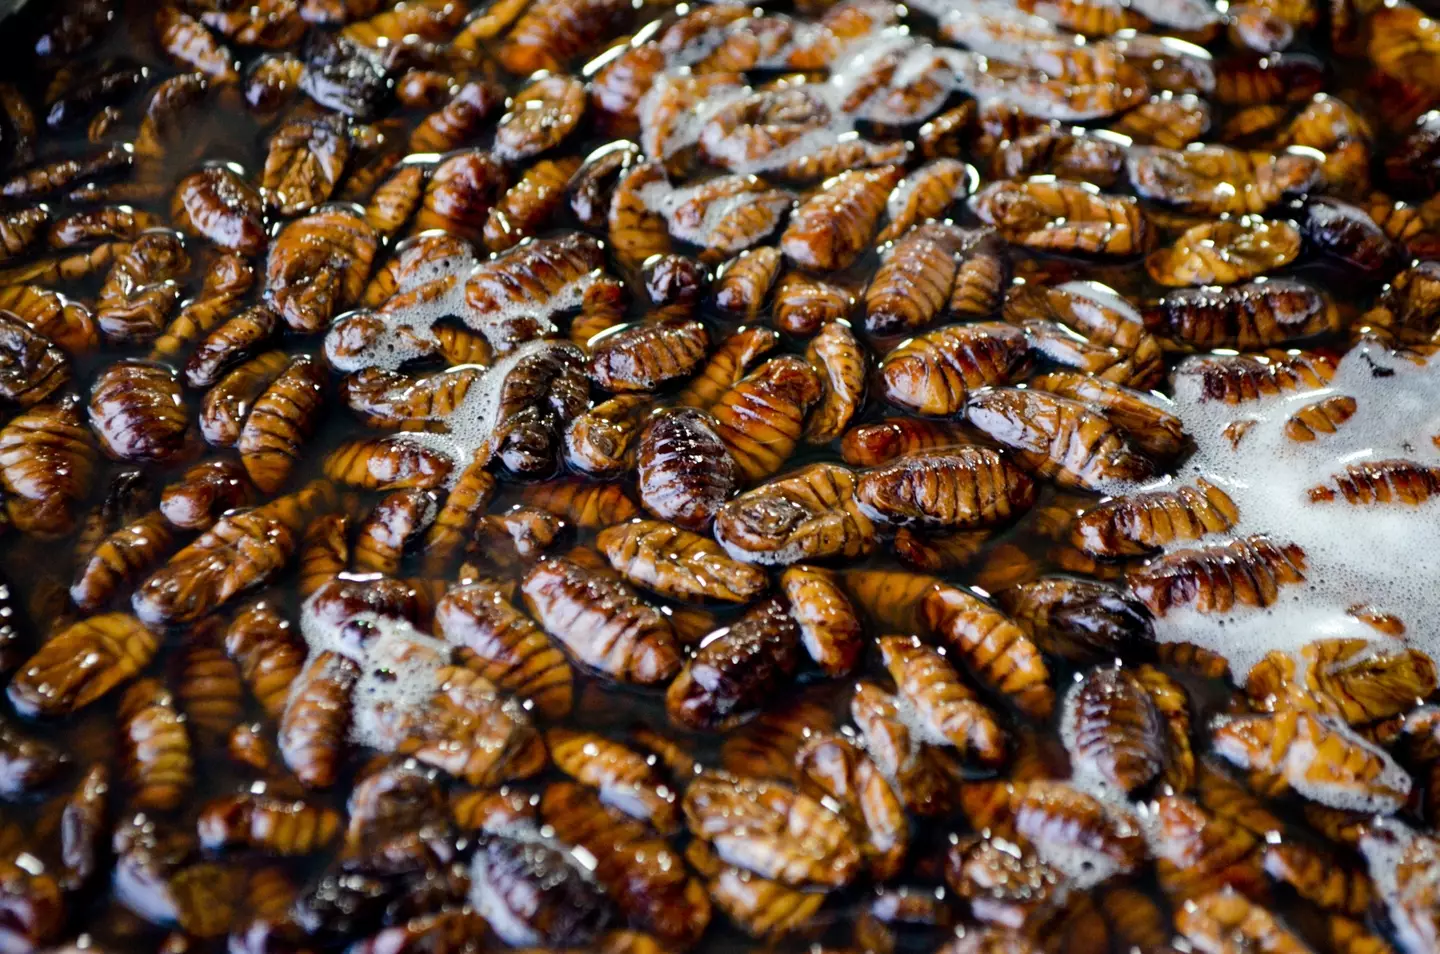 Cockroaches are abundant in some parts of the city.